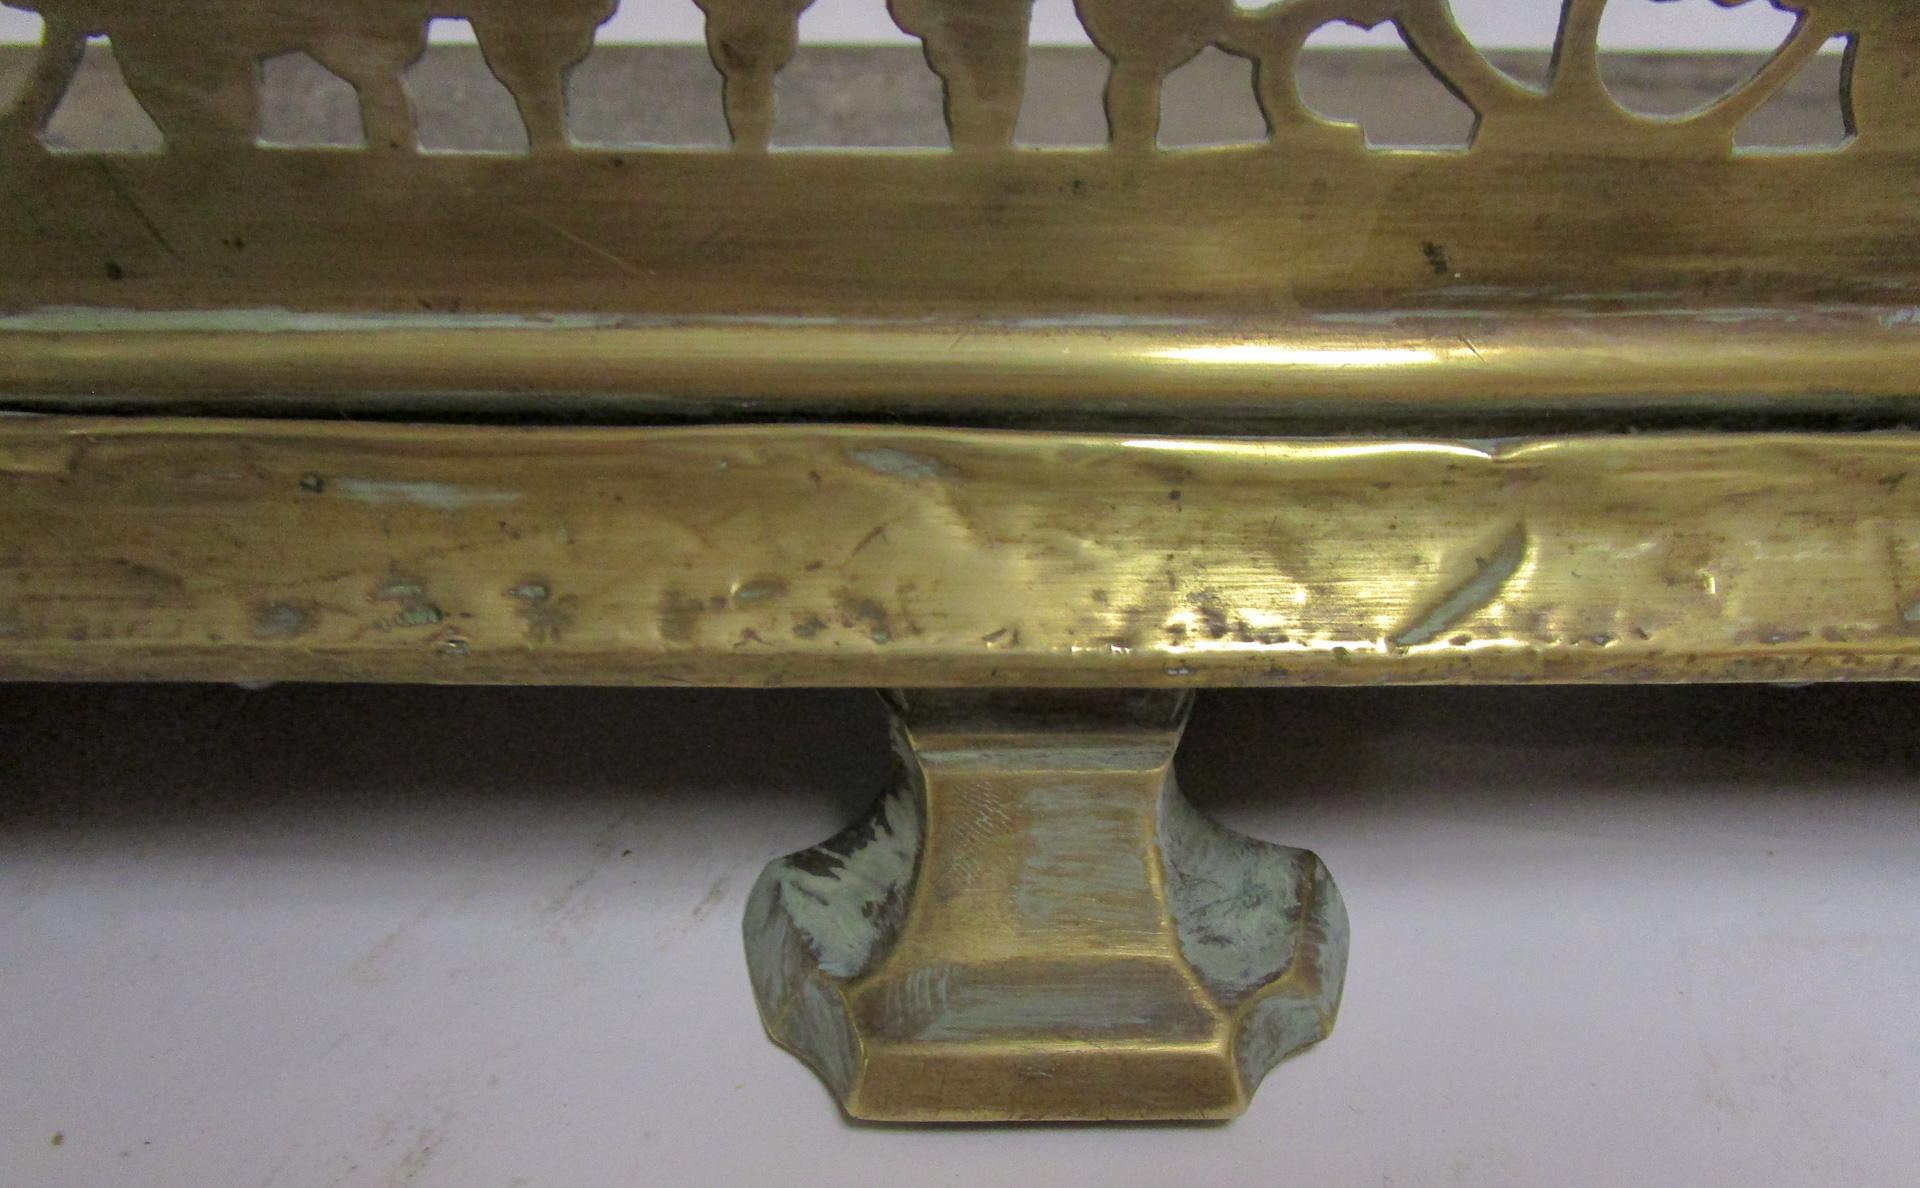 Late 19th Century 19th Century English Aesthetic Movement Reticulated Brass Fireplace Fender